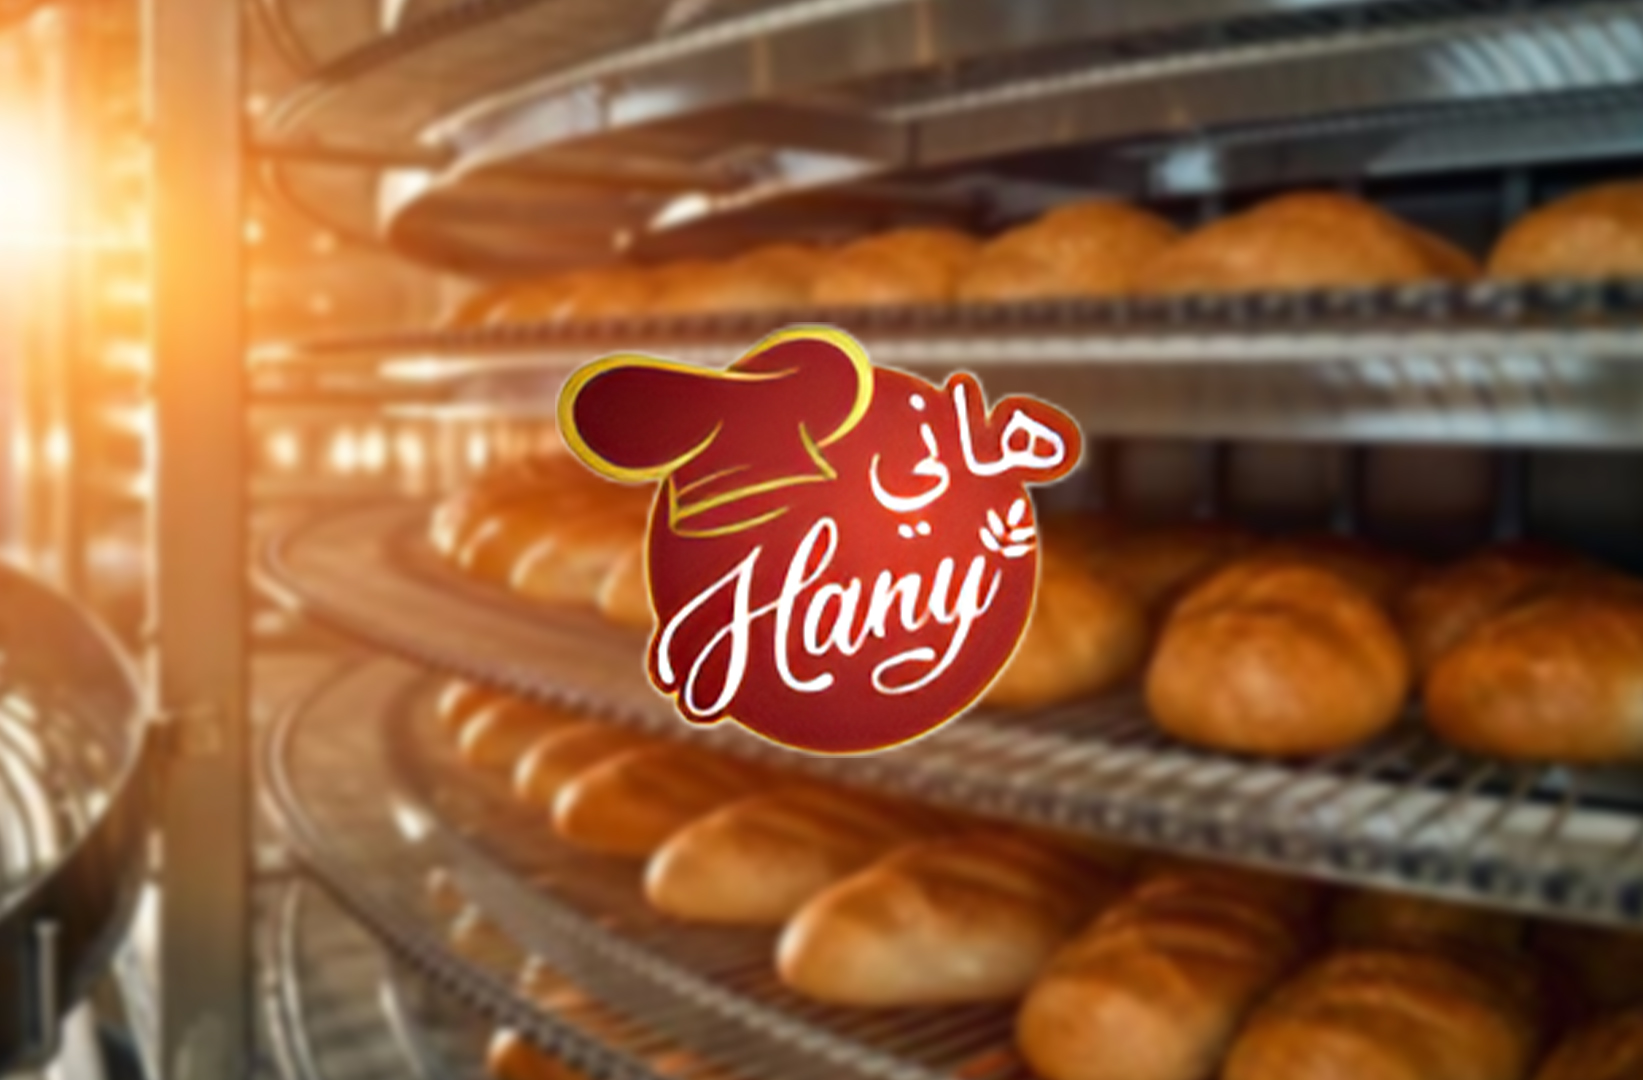 Hany Bakery, Odoo ERP Transition, Case Study Success, Bakery Industry Solutions, ERP Implementation Journey, Business Efficiency Improvement, Successful ERP Transition, Odoo Success Story, Bakery Operations Optimization, ERP Impact on Bakery